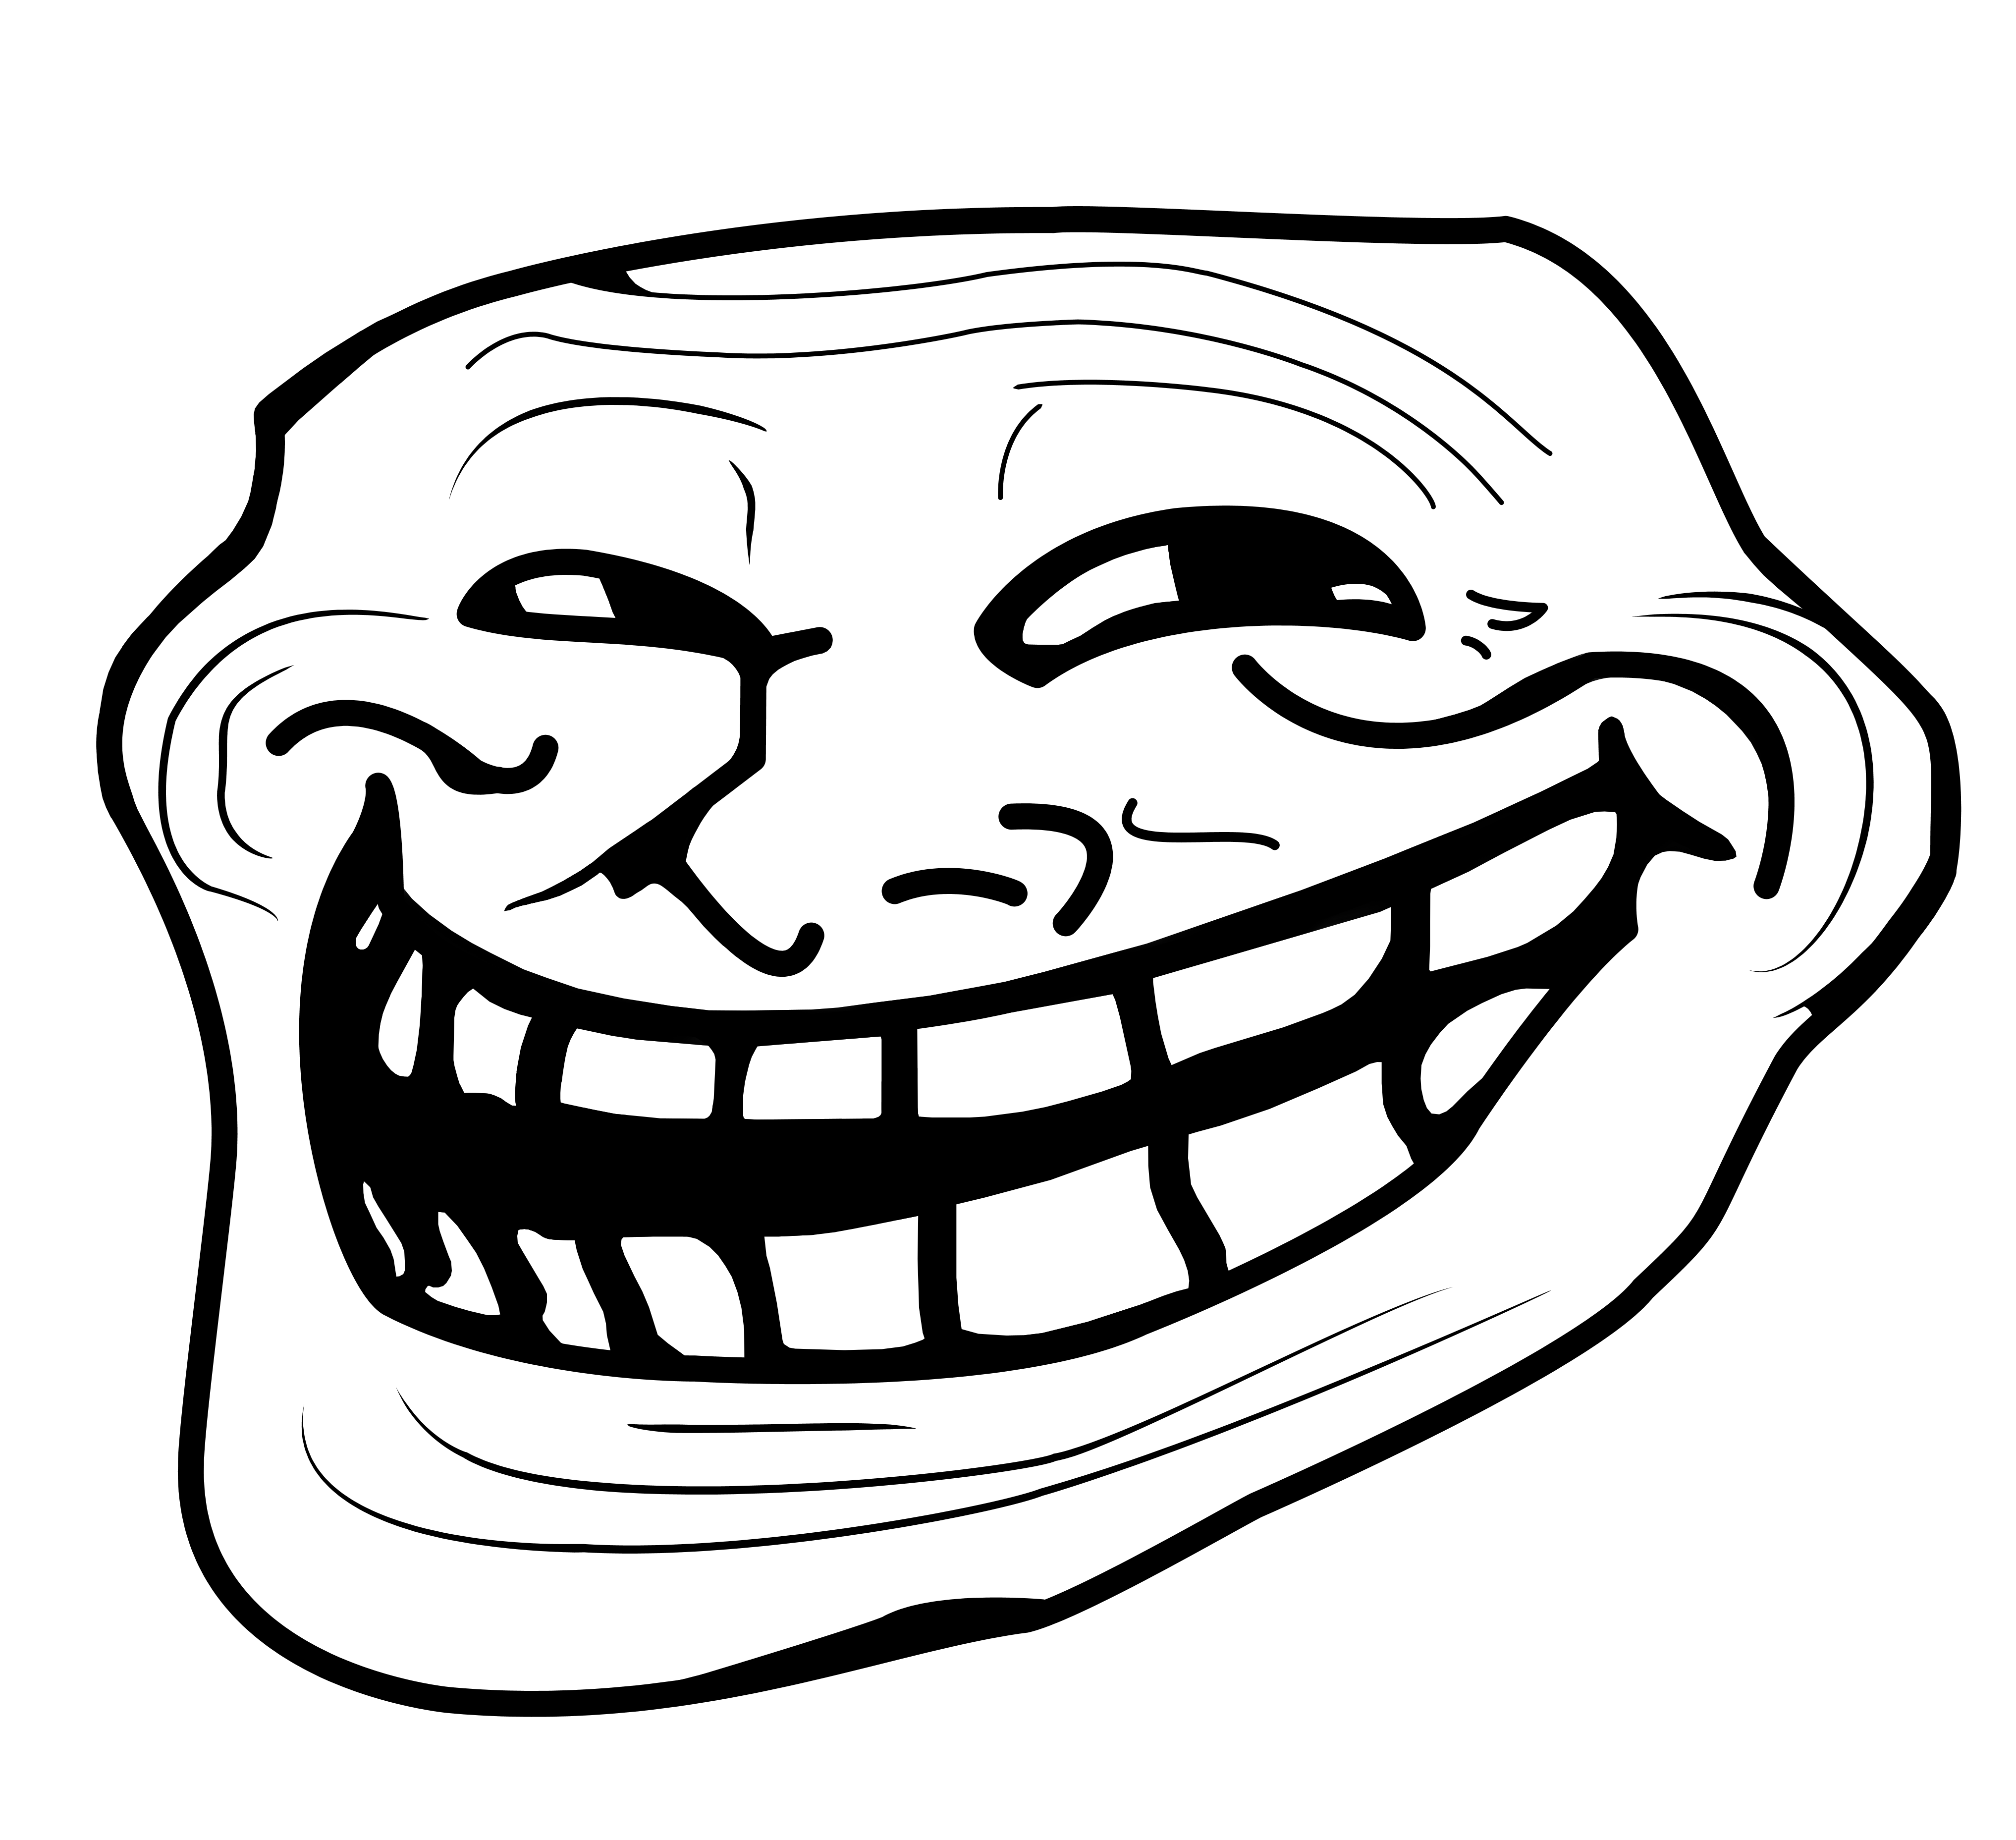 Famous-characters-Troll-face-260360.png